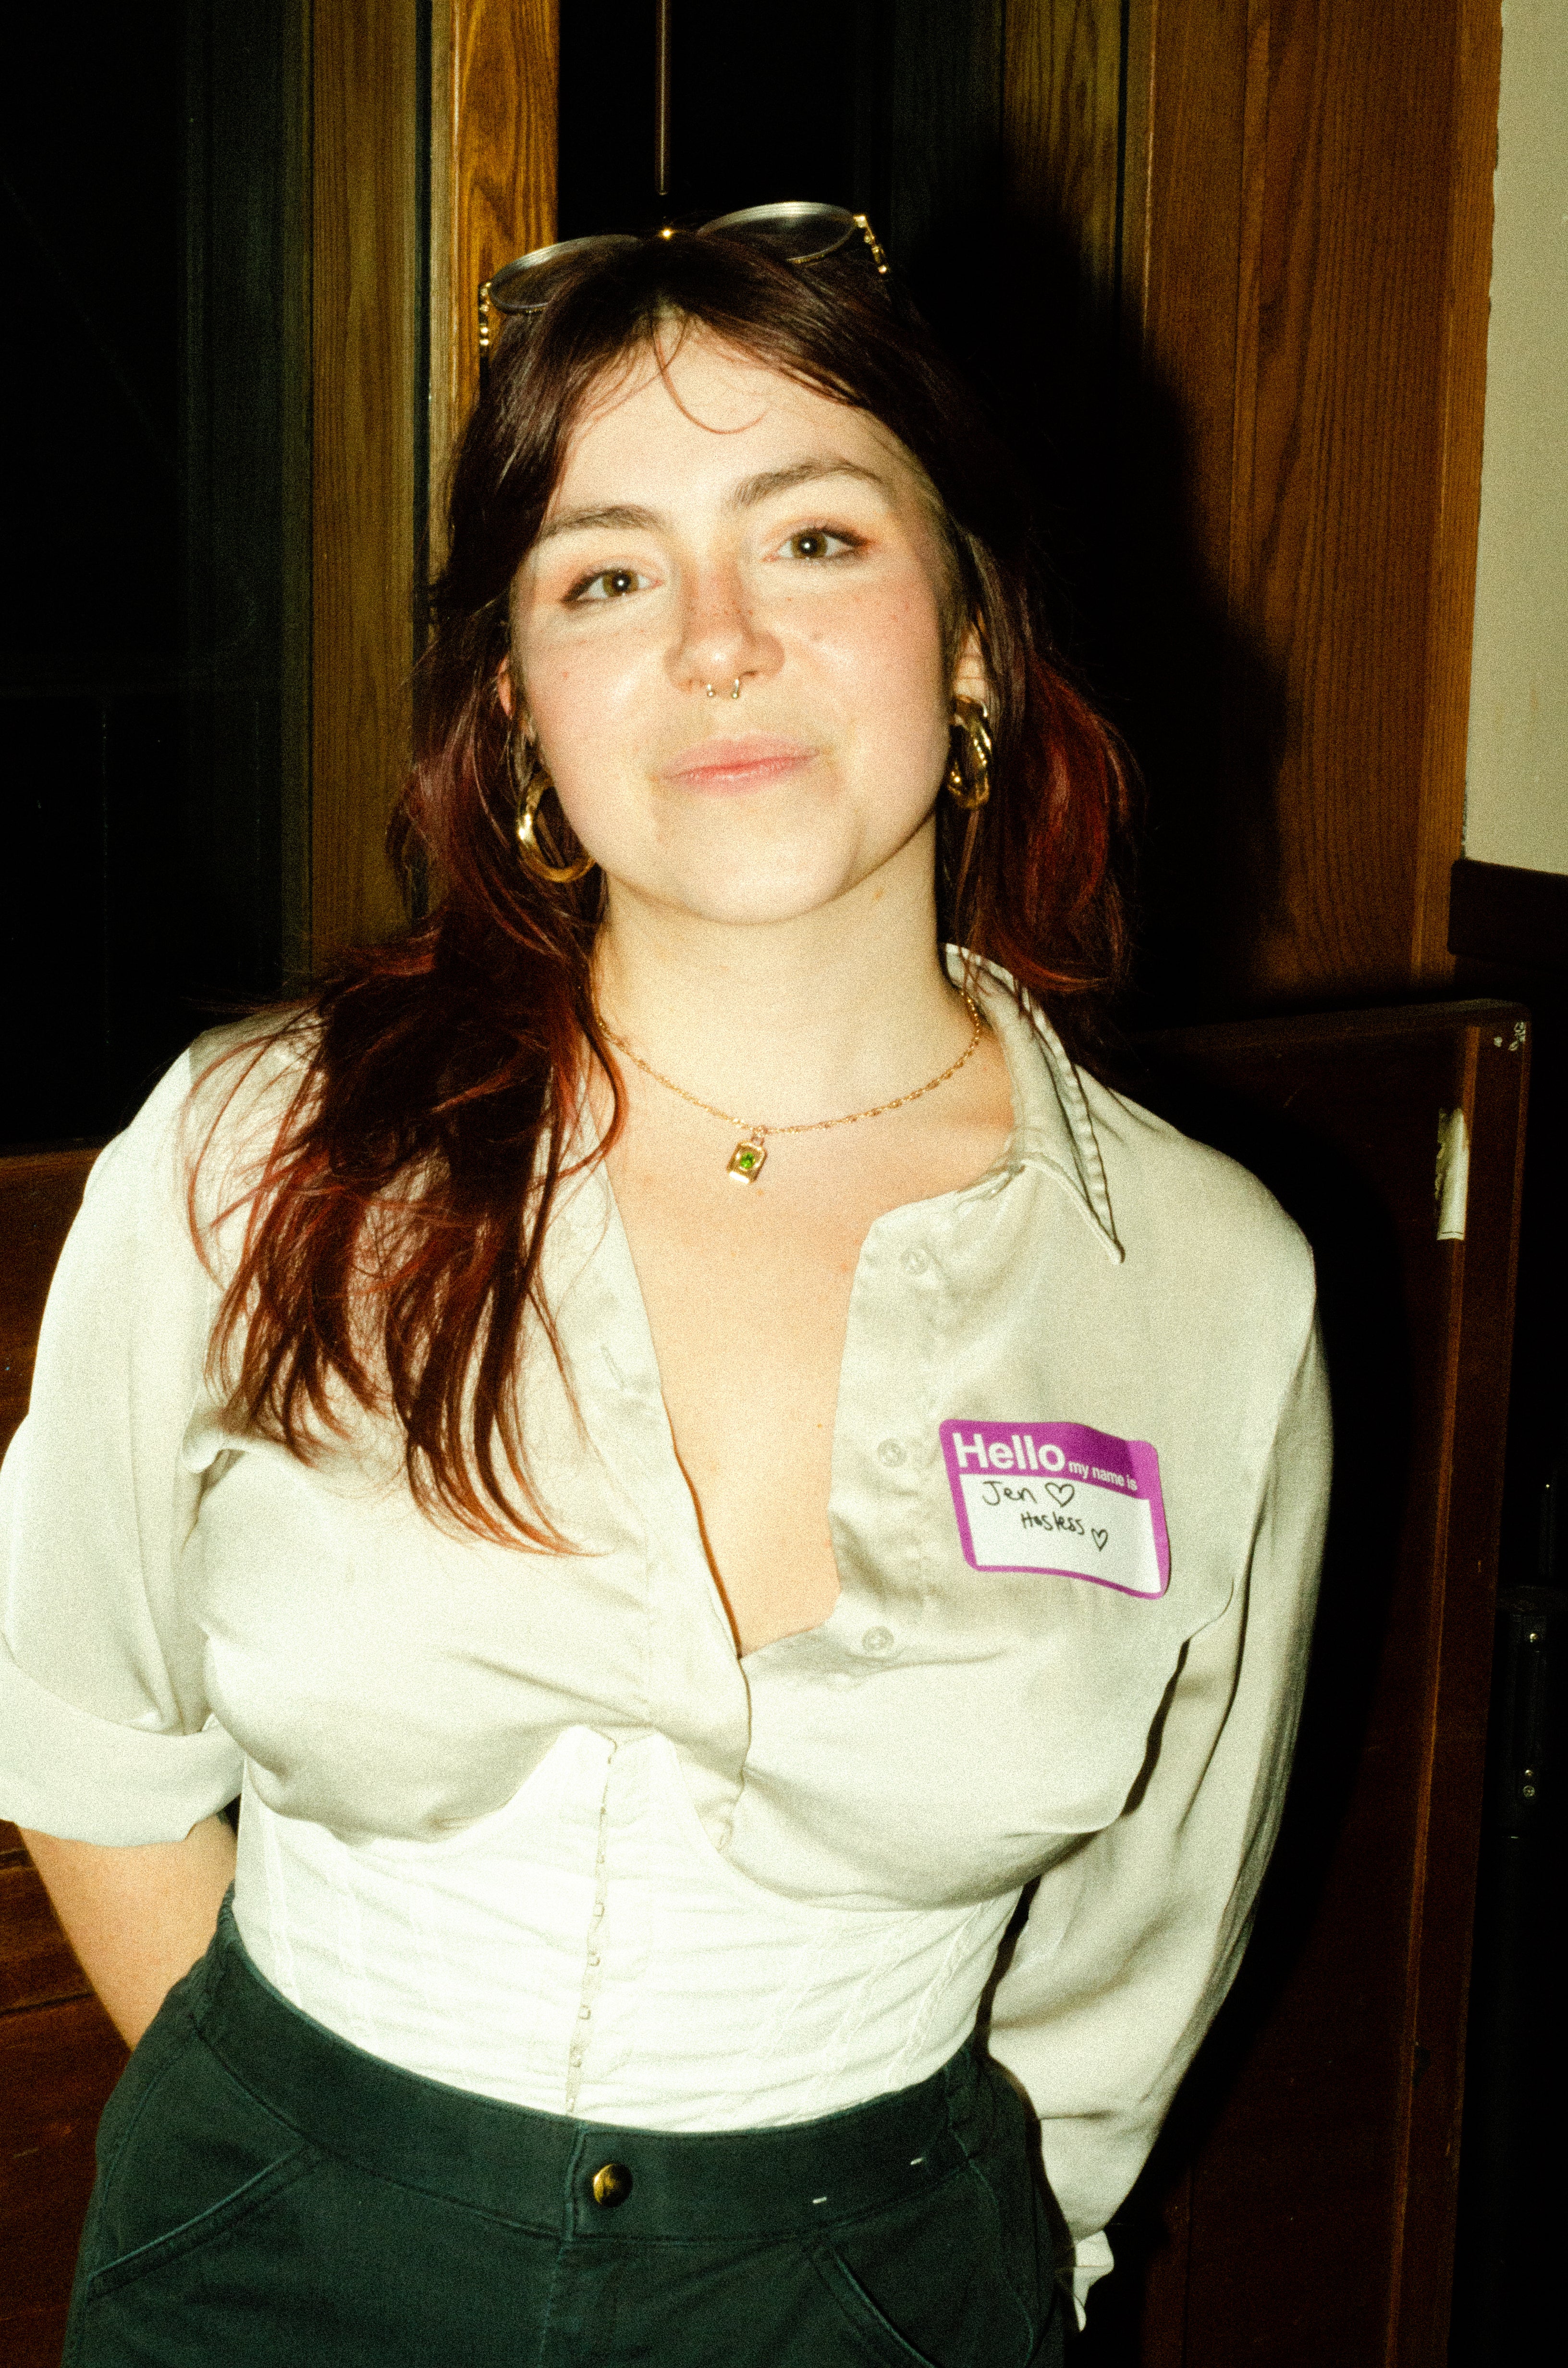 Photo of Jen Barett, the host and creator of Quickie’s Speed Dating event